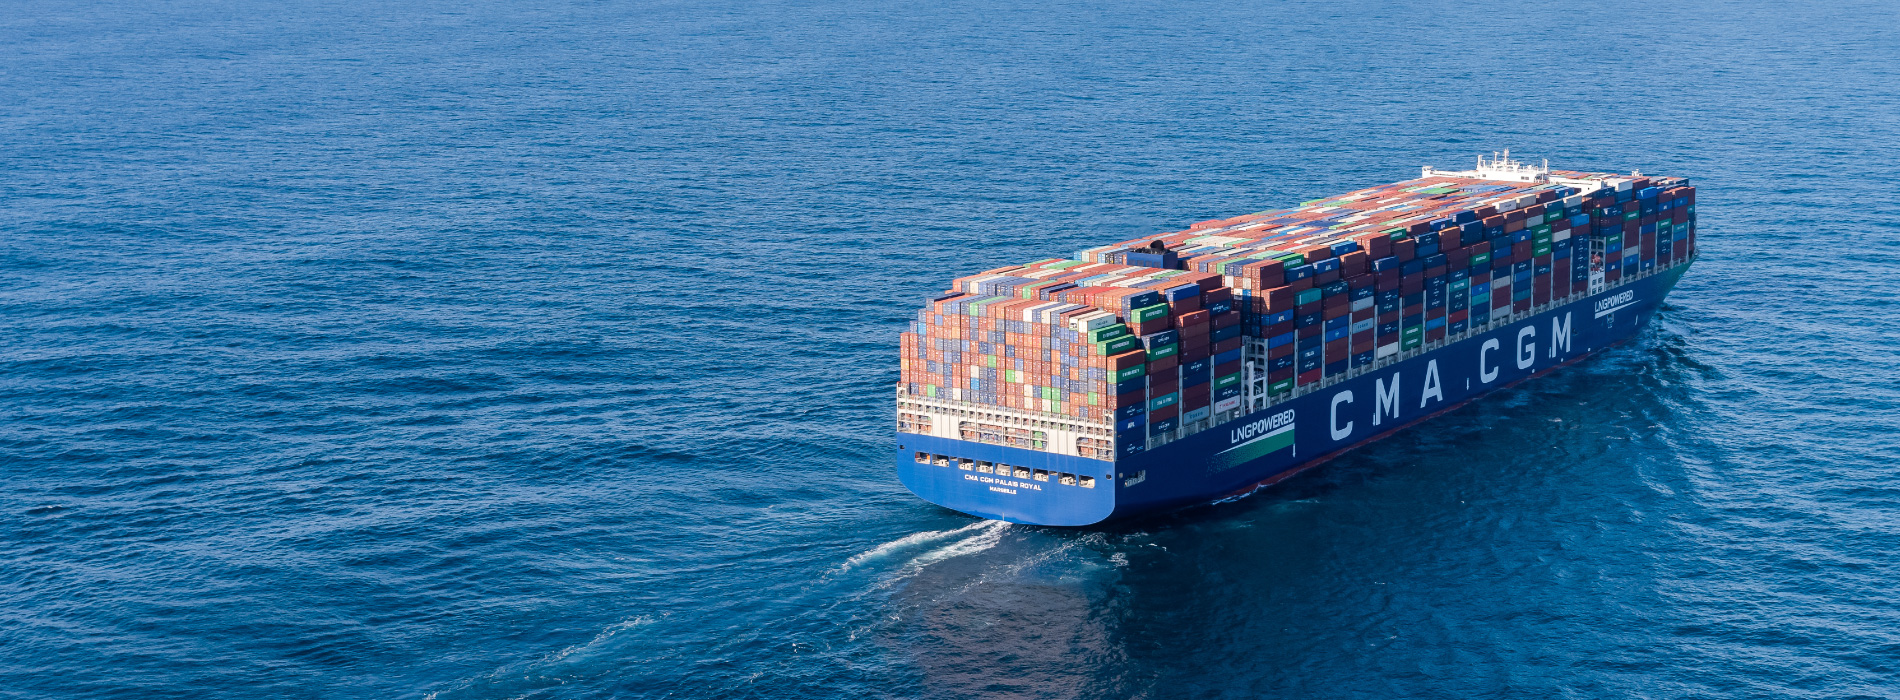 [INTERNATIONAL NEWS] CMA CGM Group launches a call for projects worth €200 million to step up the pace of decarbonization of the French shipping industry